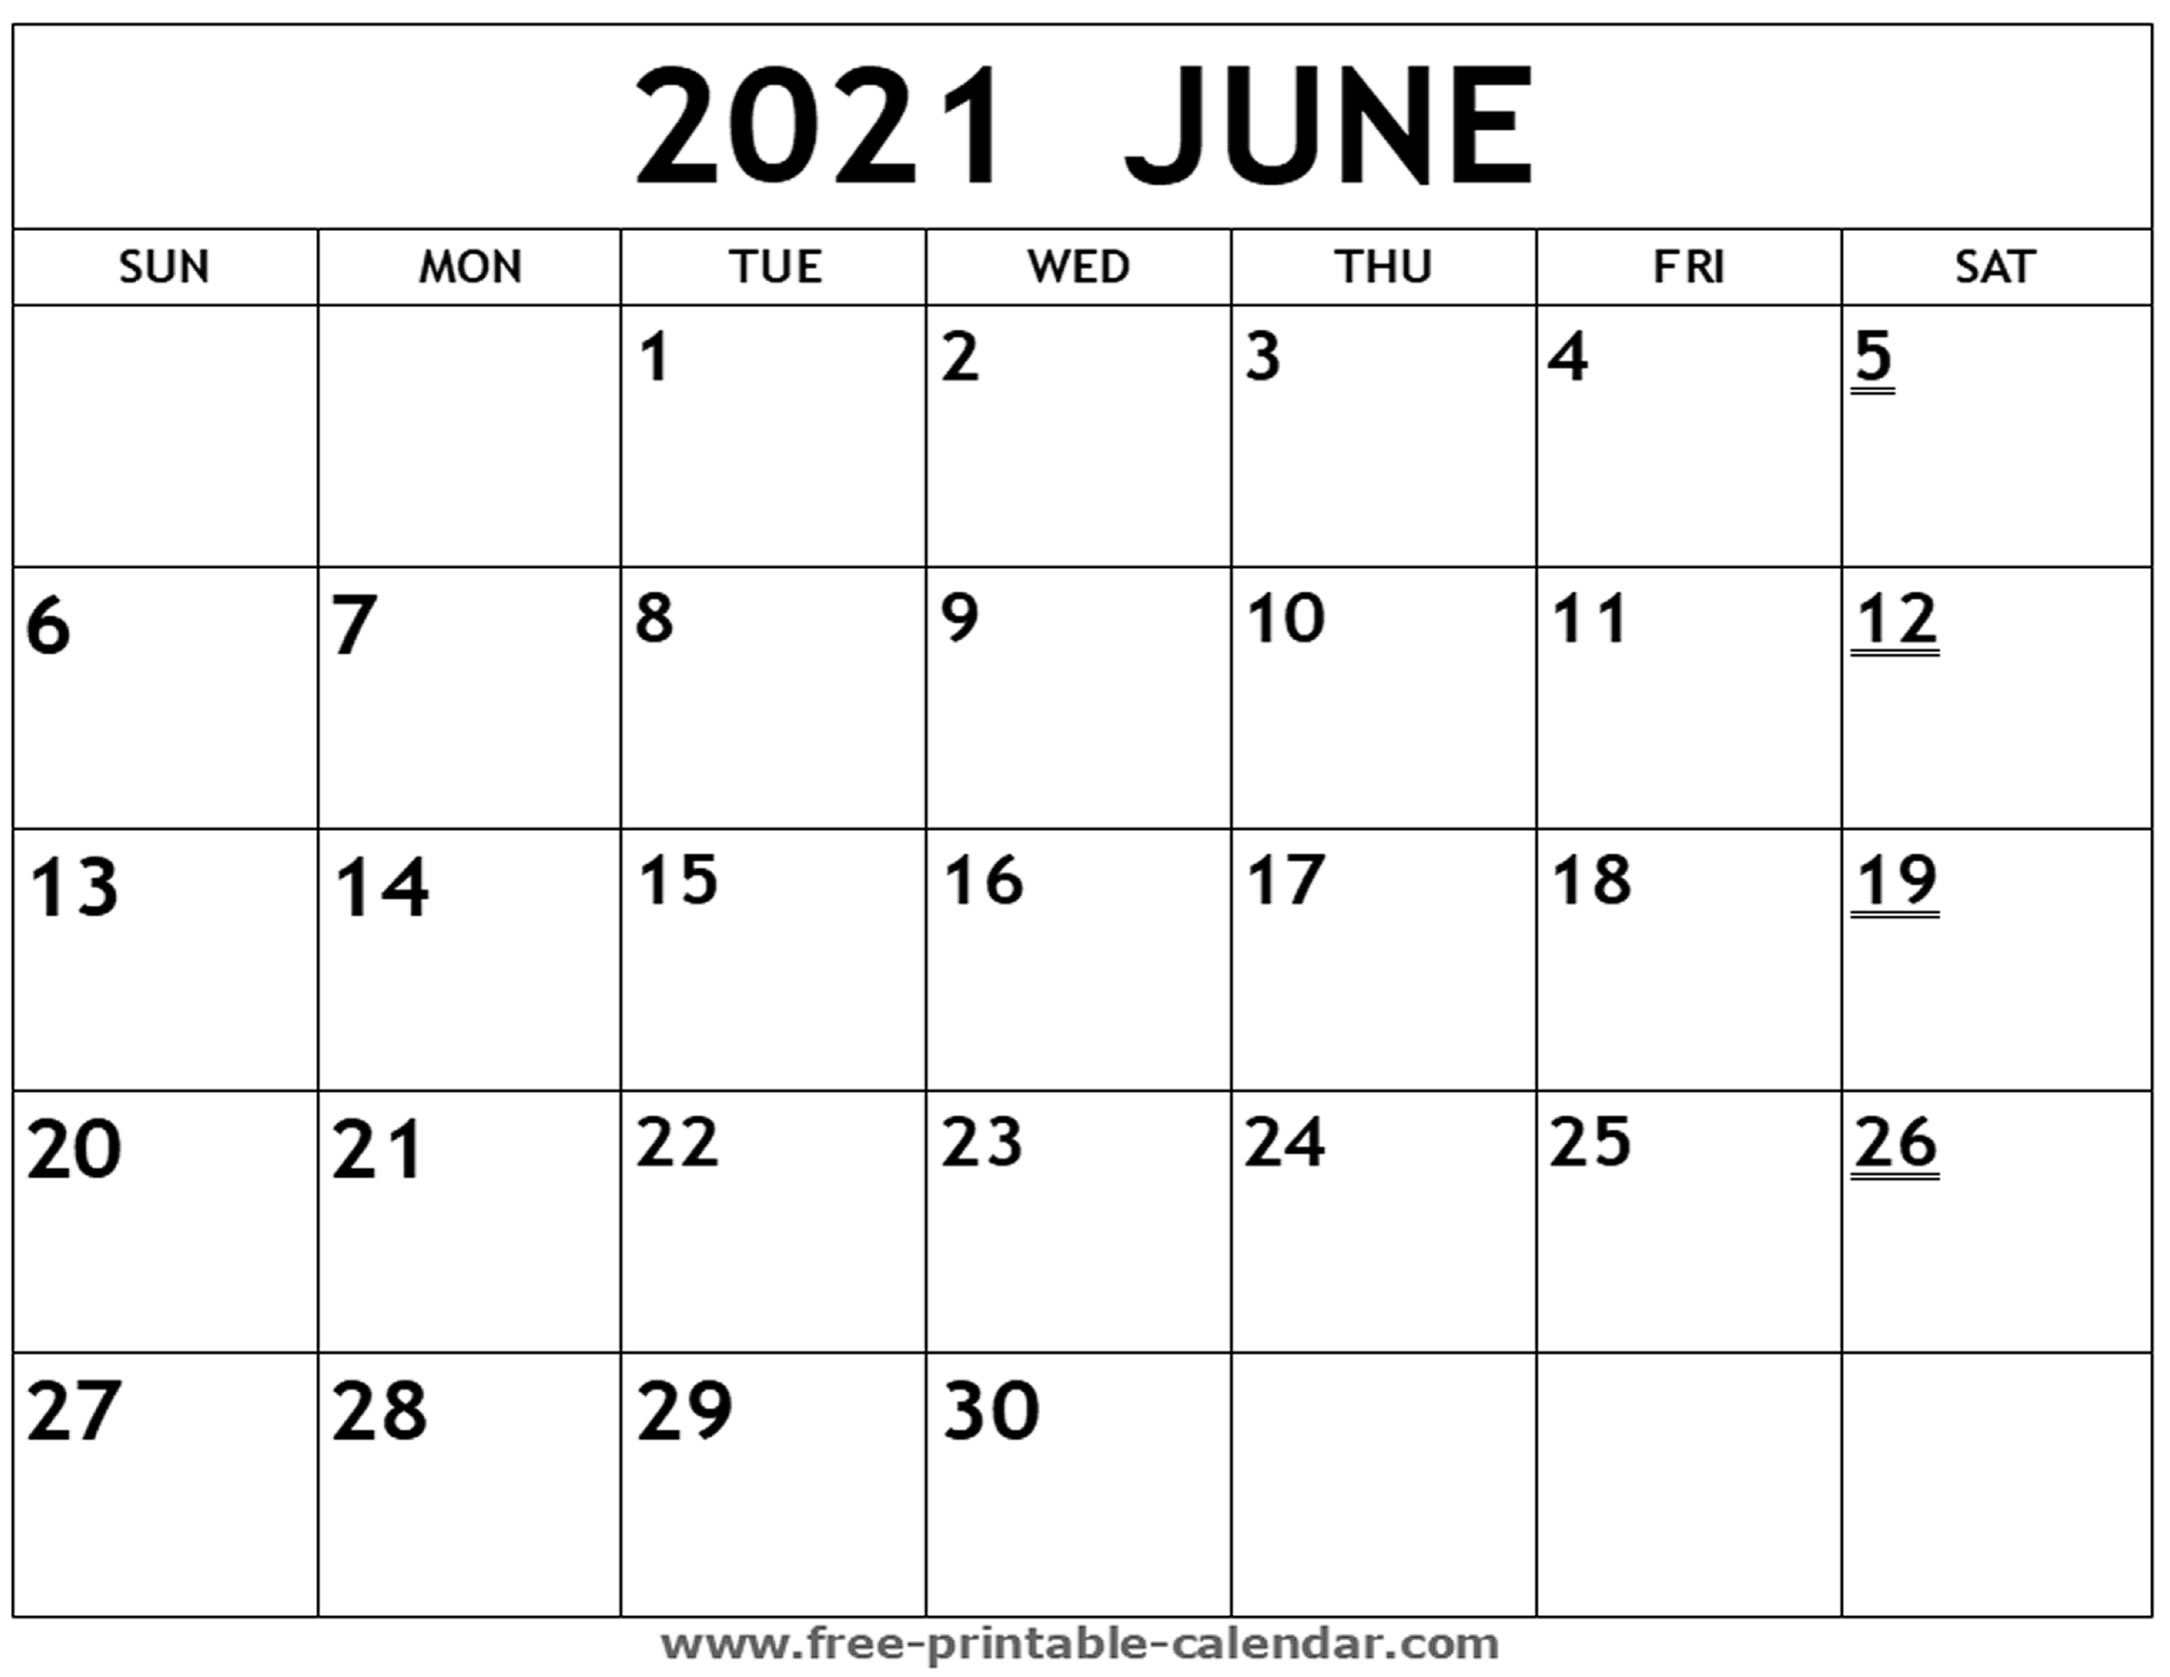 print-free-calendars-without-downloading-free-calendar-template